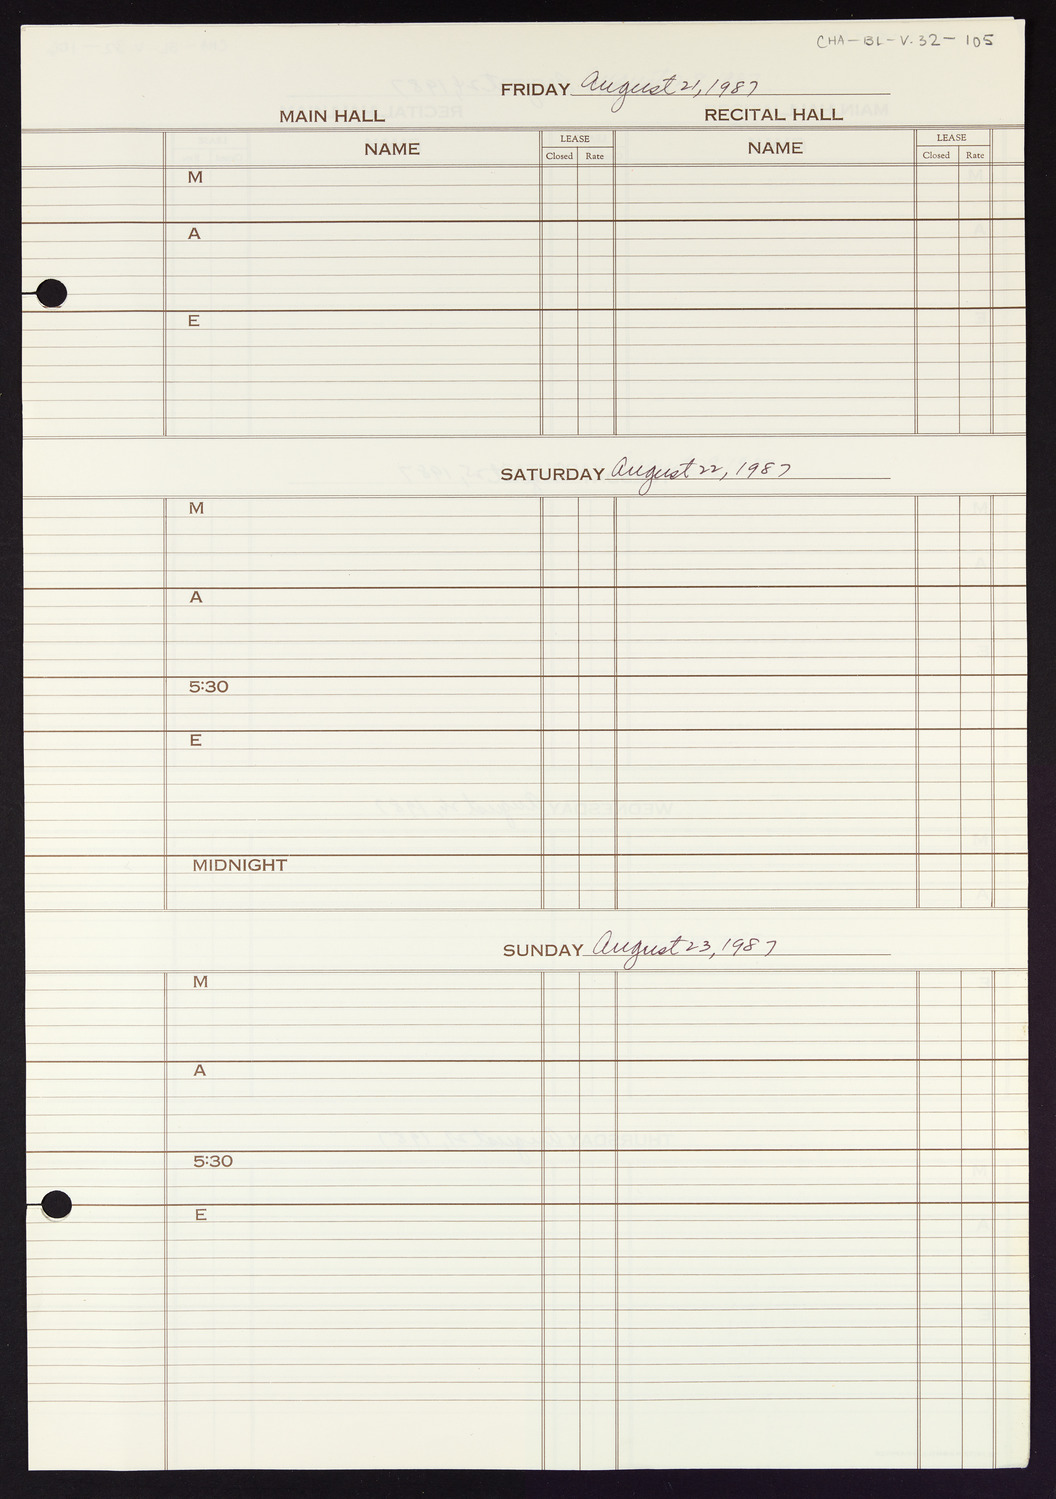 Carnegie Hall Booking Ledger, volume 32, page 105